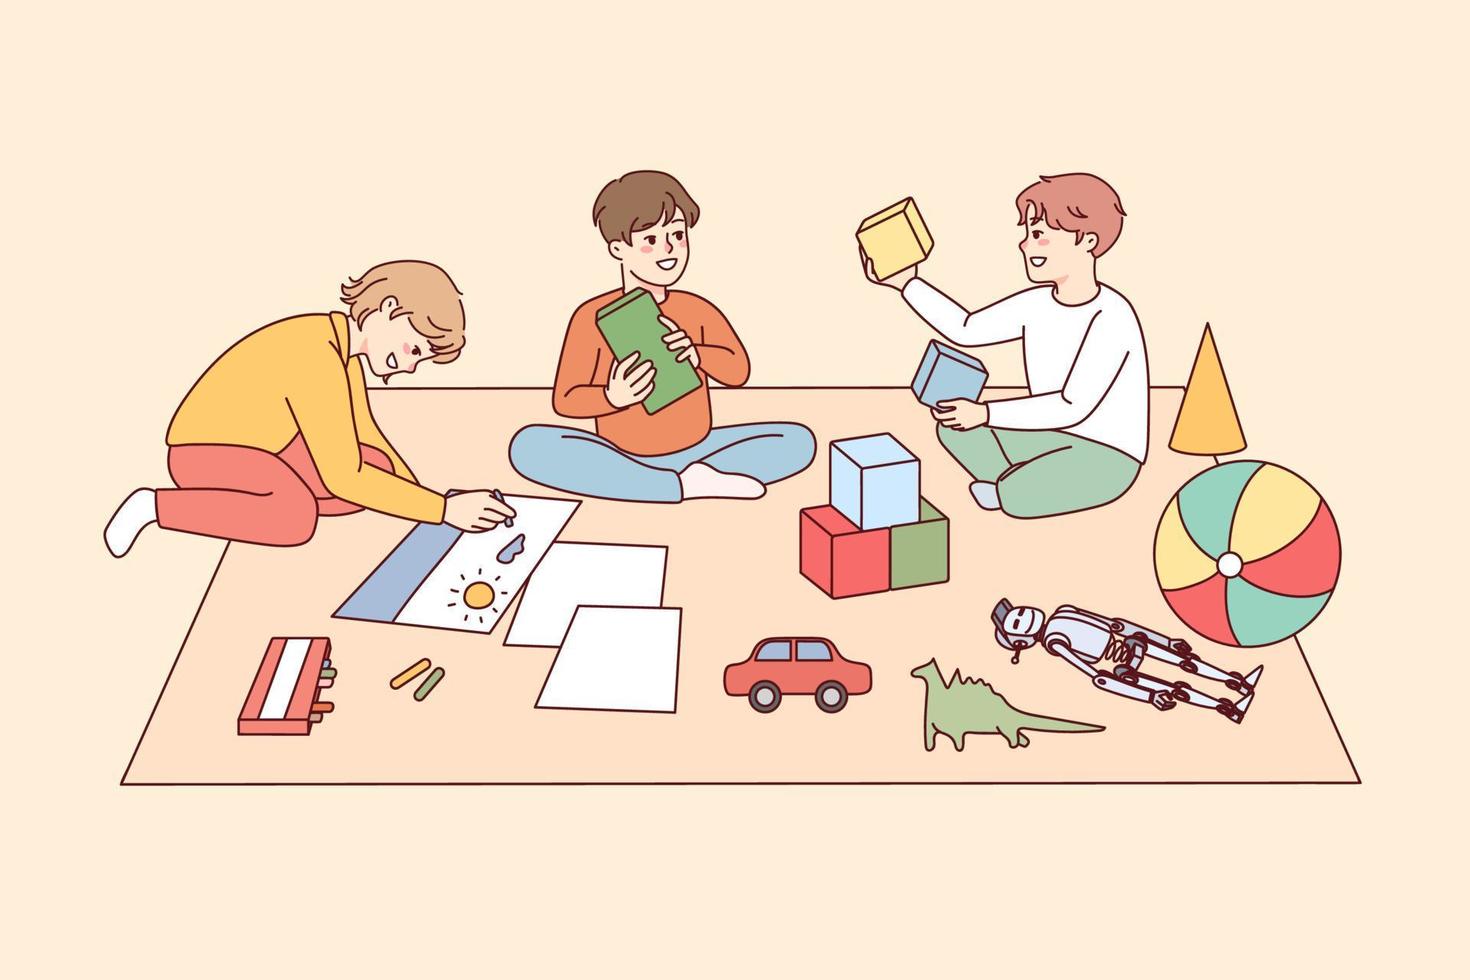 Happy kids sitting on floor playing with toys together. Smiling children have fun enjoy game activity in group. Childhood. Vector illustration.